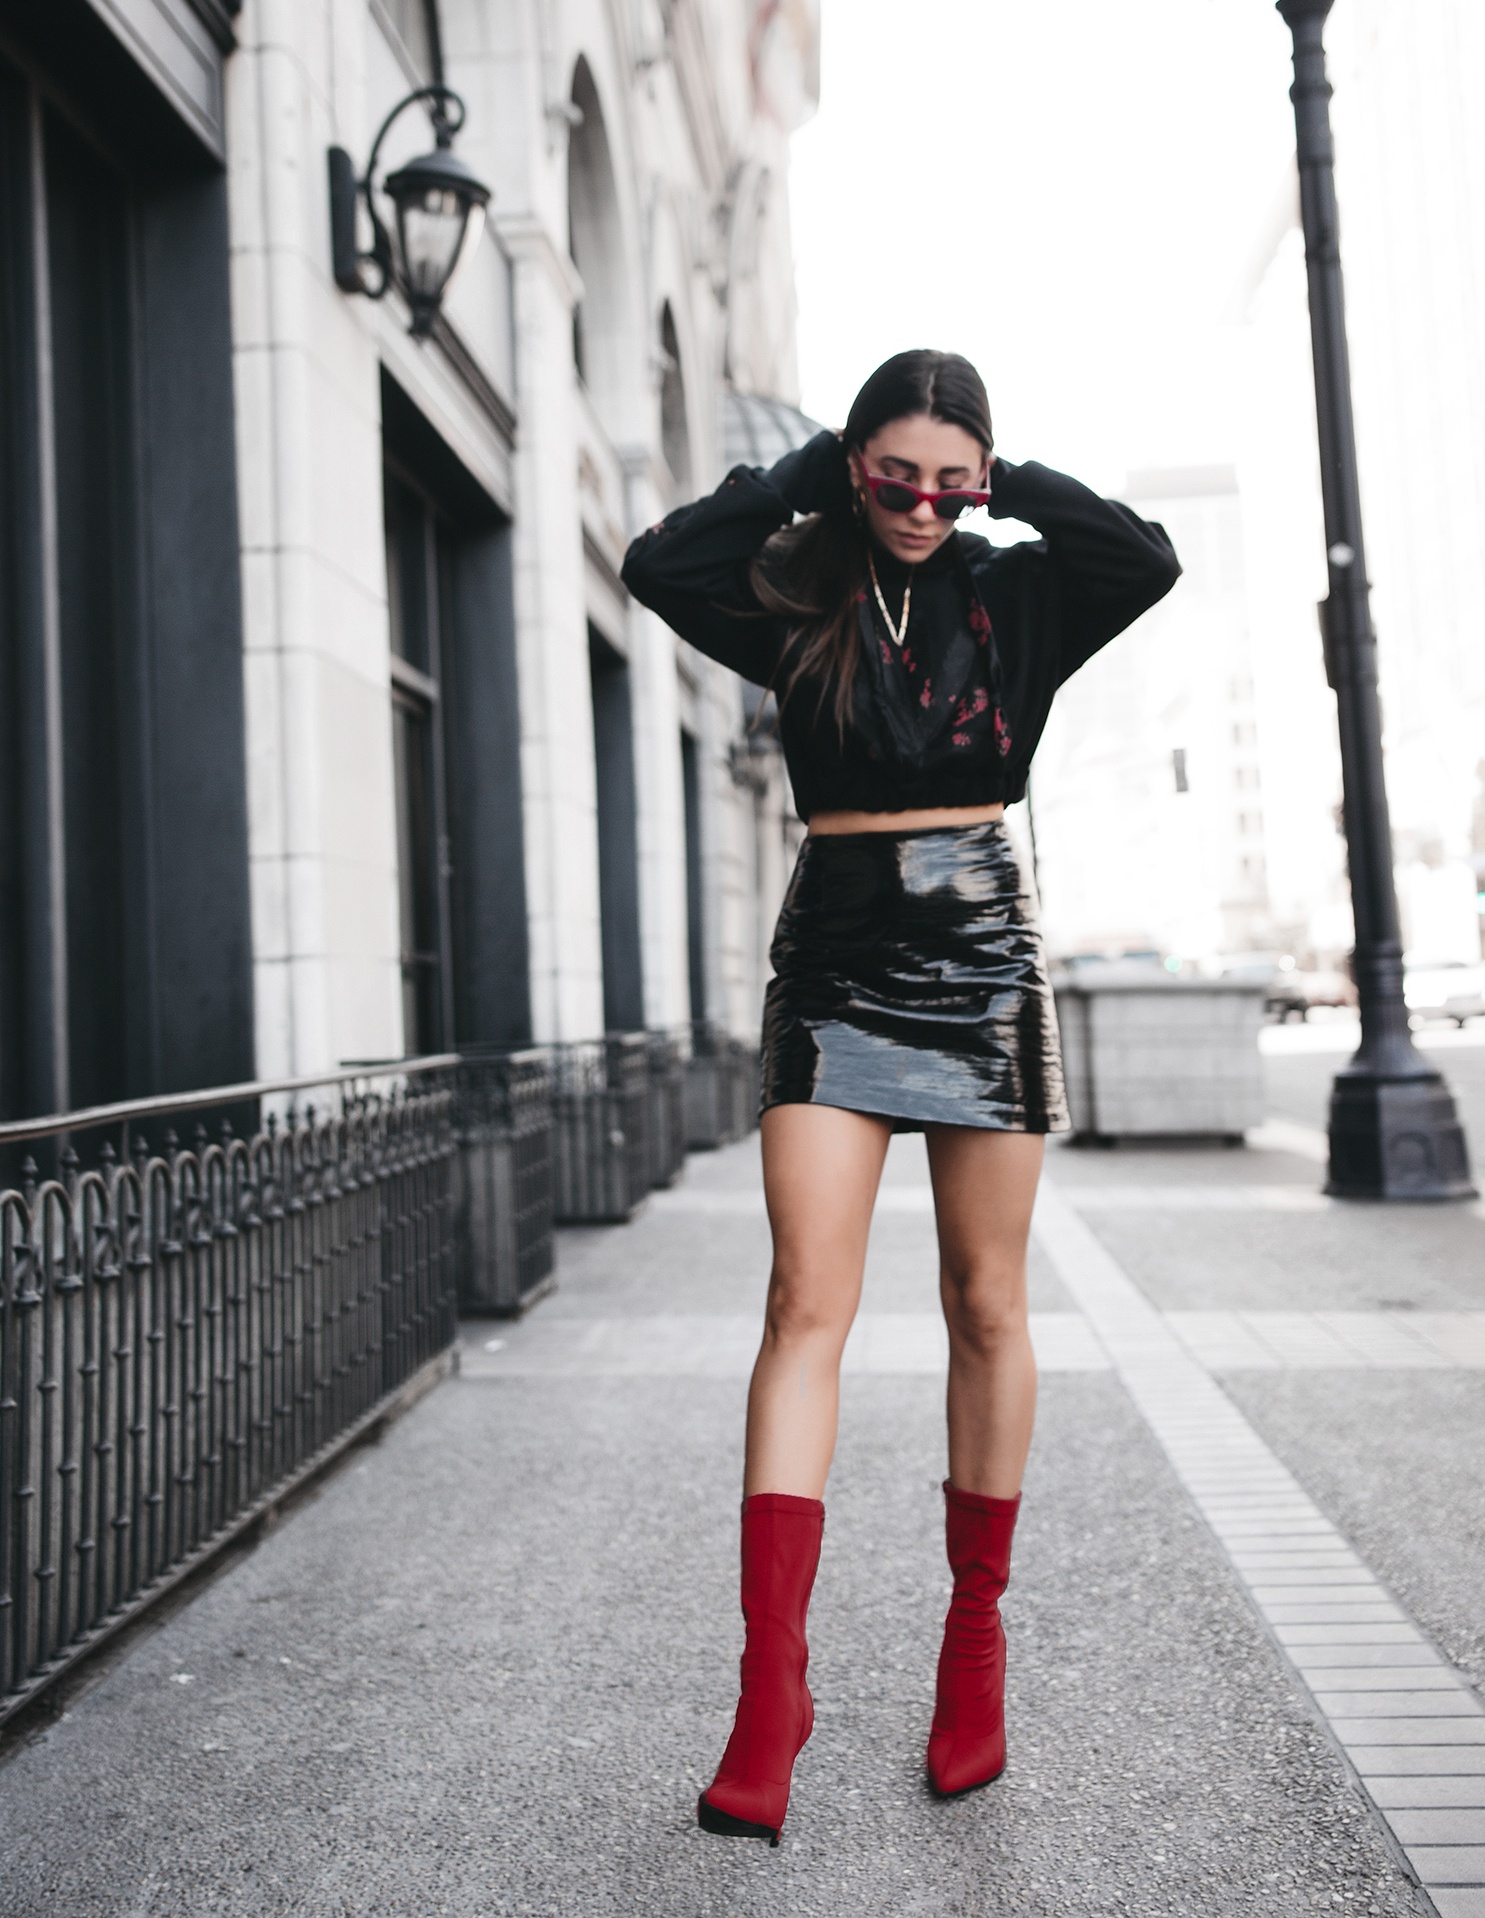 Blog Photography 101: Up Your Street Style Game